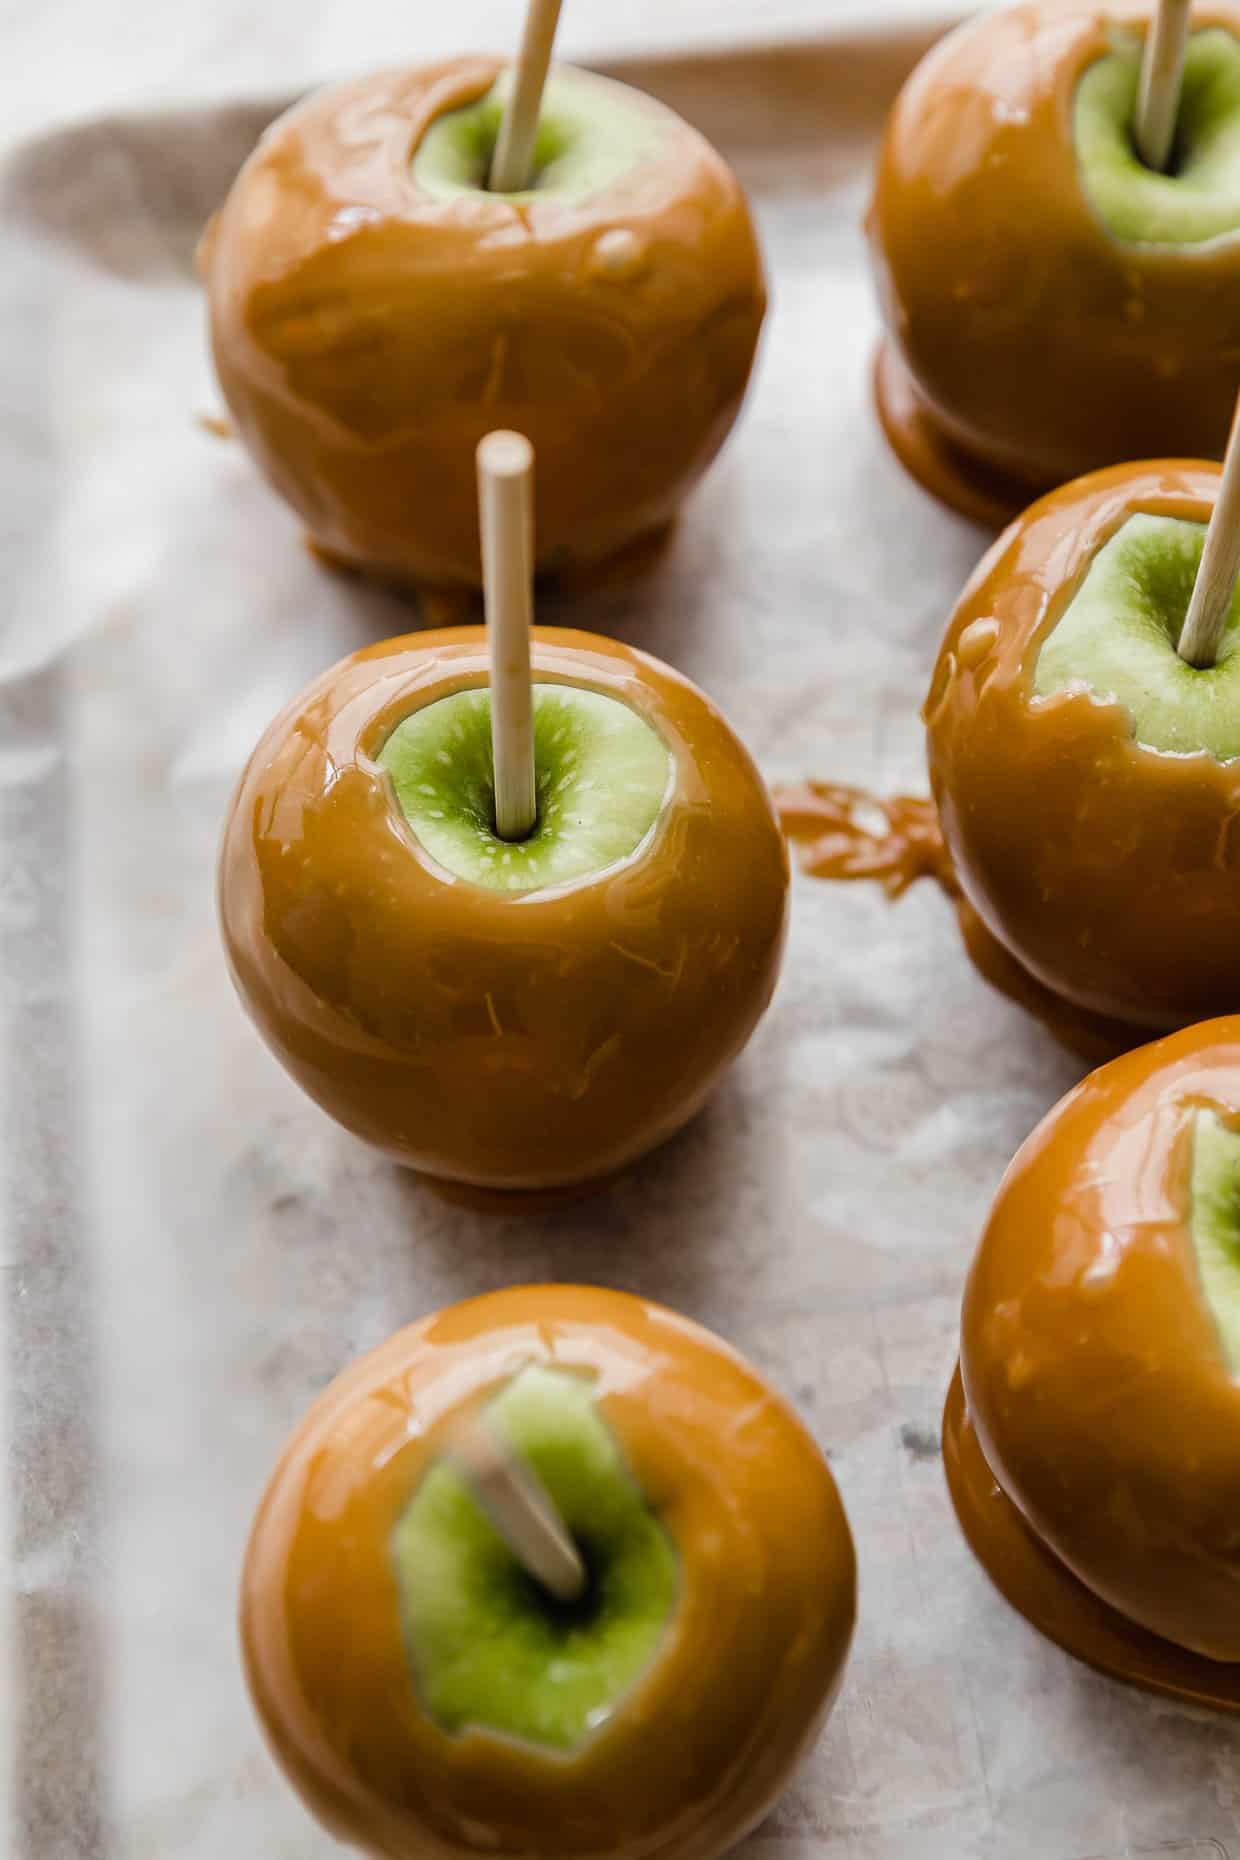 Green Granny Smith apples covered in caramel on a wax paper lined tray.